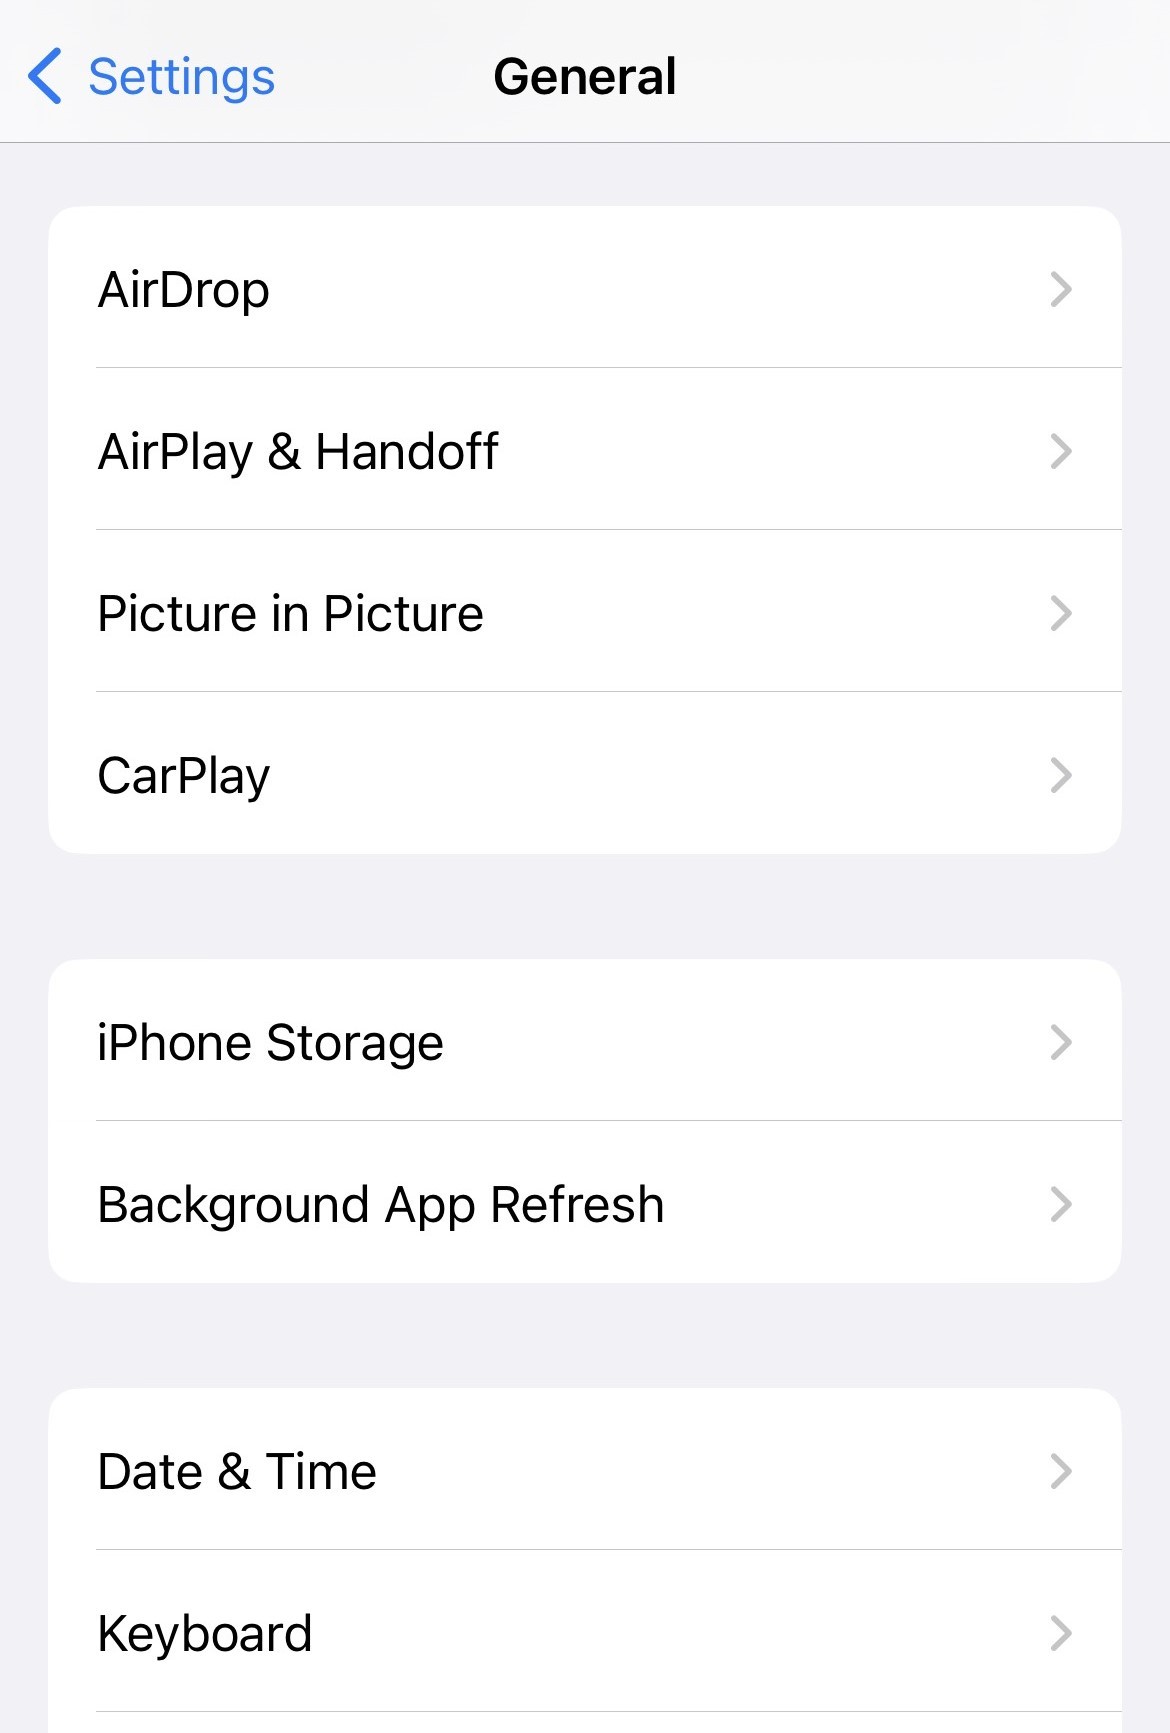 scroll down and tap on iPhone Storage or iPad Storage